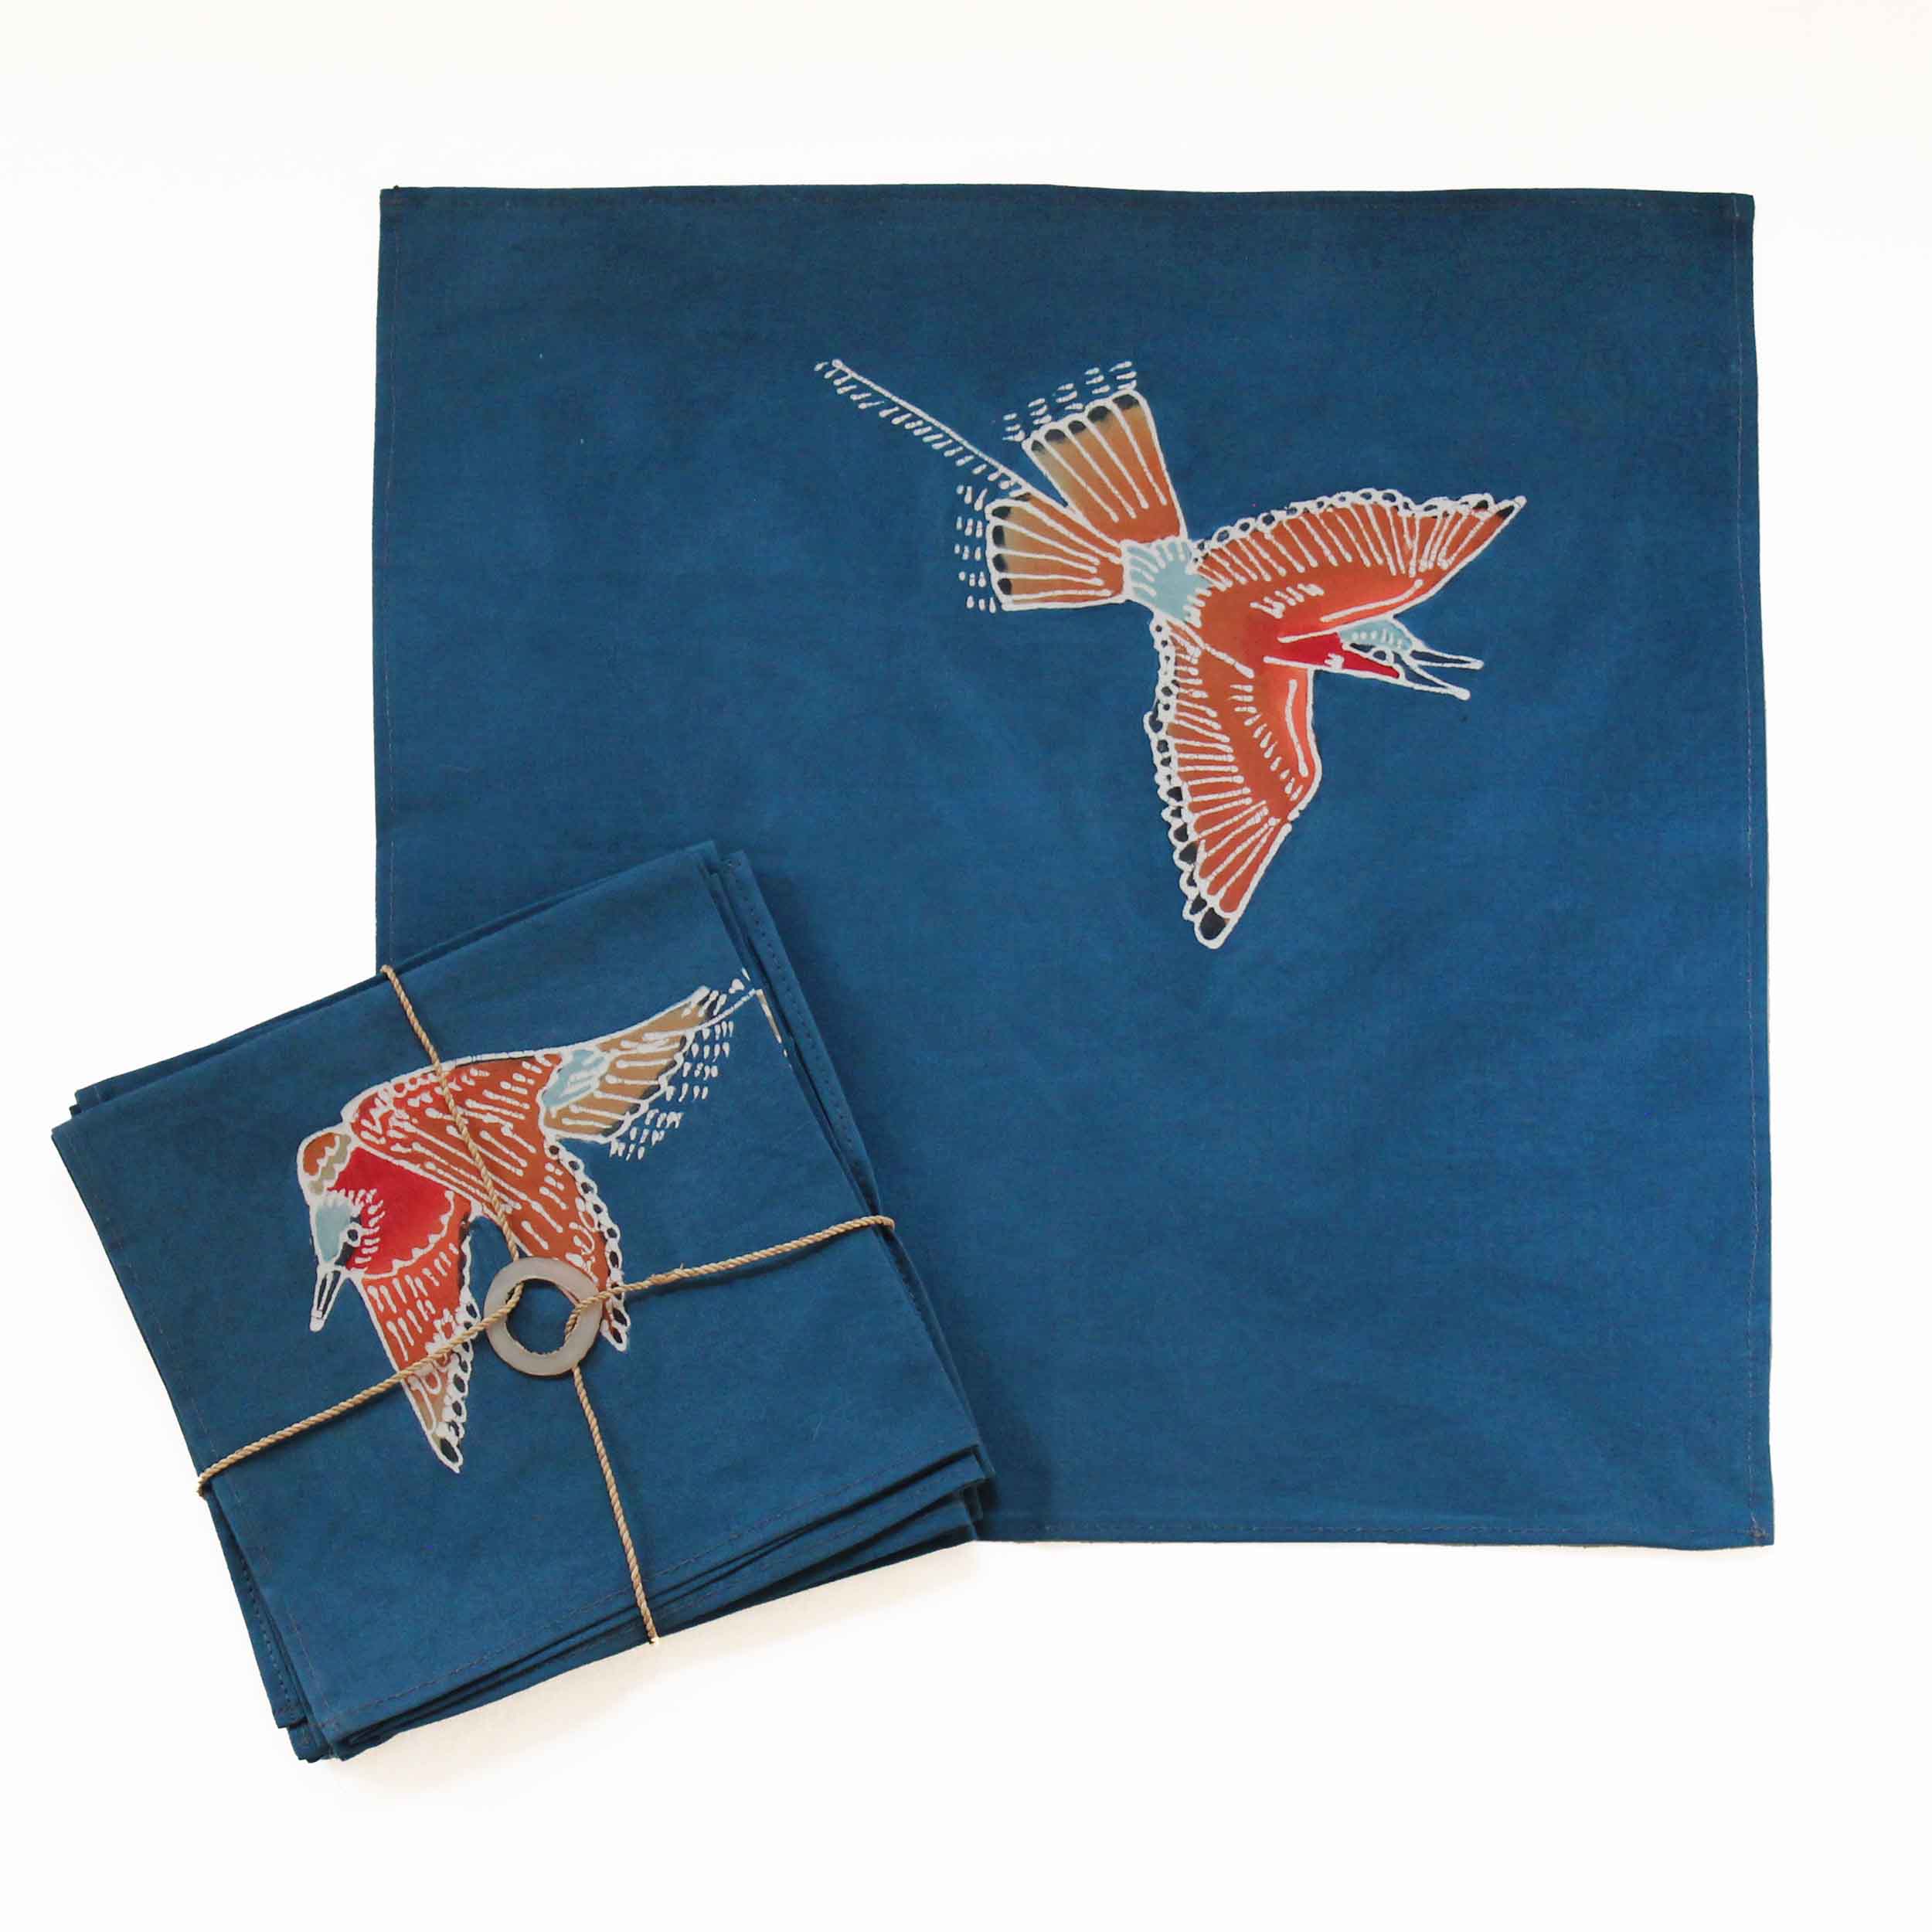 Papiko Carmine Bee Eater Napkin Set - Hand Painted by TRIBAL TEXTILES - Handcrafted Home Decor Interiors - African Made